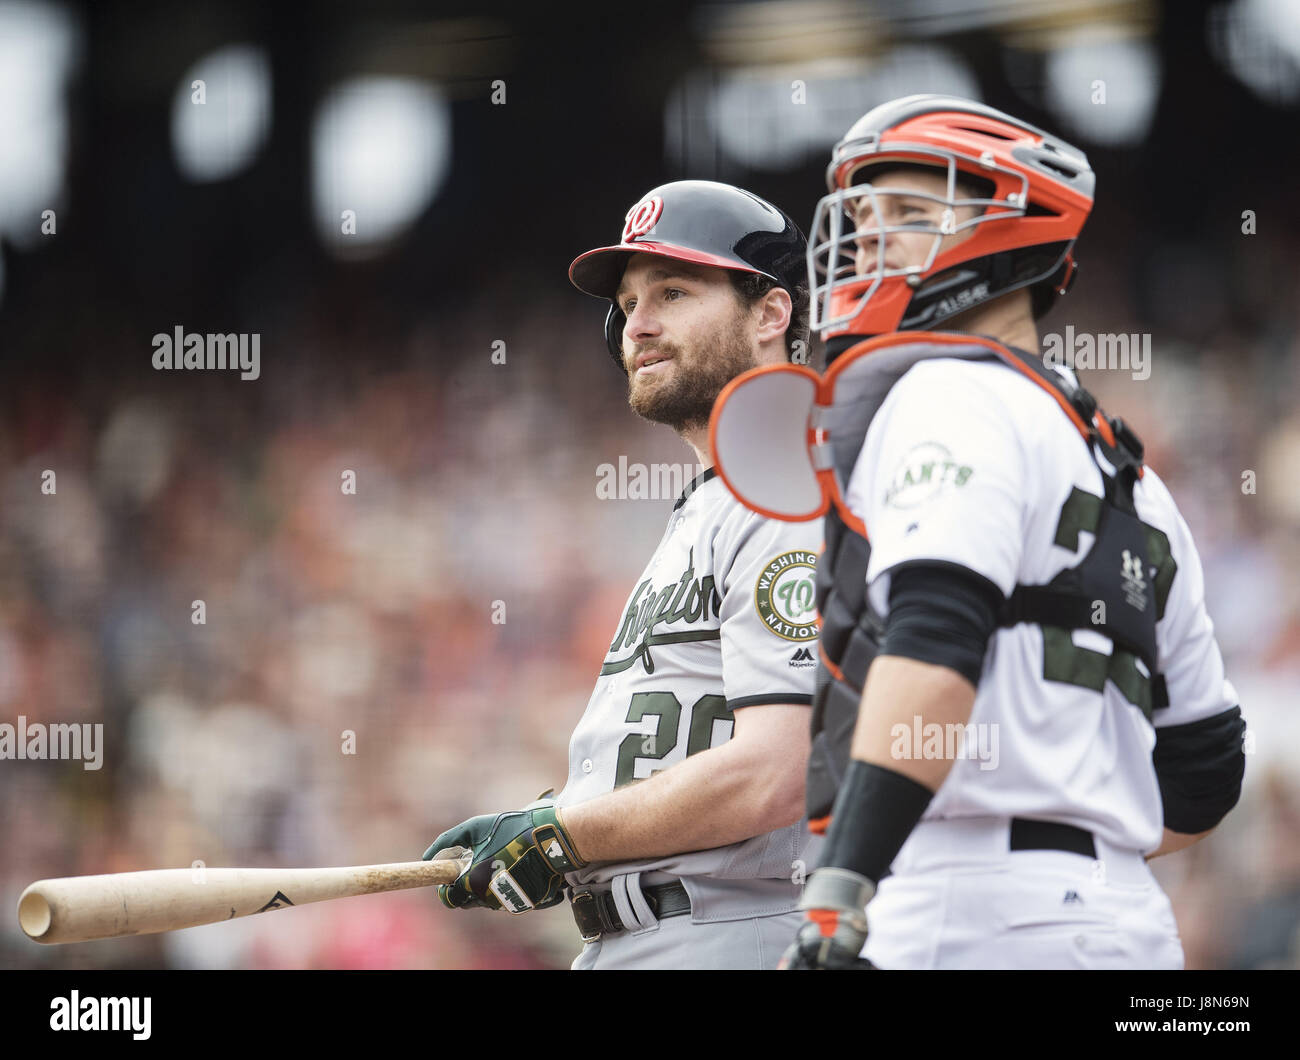 San Francisco, California, USA. 29th May, 2017. Washington Nationals second baseman Daniel Murphy (20) and San Francisco Giants catcher Buster Posey (28) watch a high fly go foul, during a MLB baseball game between the Washington Nationals and the San Francisco Giants on Memorial Day at AT&T Park in San Francisco, California. Valerie Shoaps/CSM/Alamy Live News Stock Photo